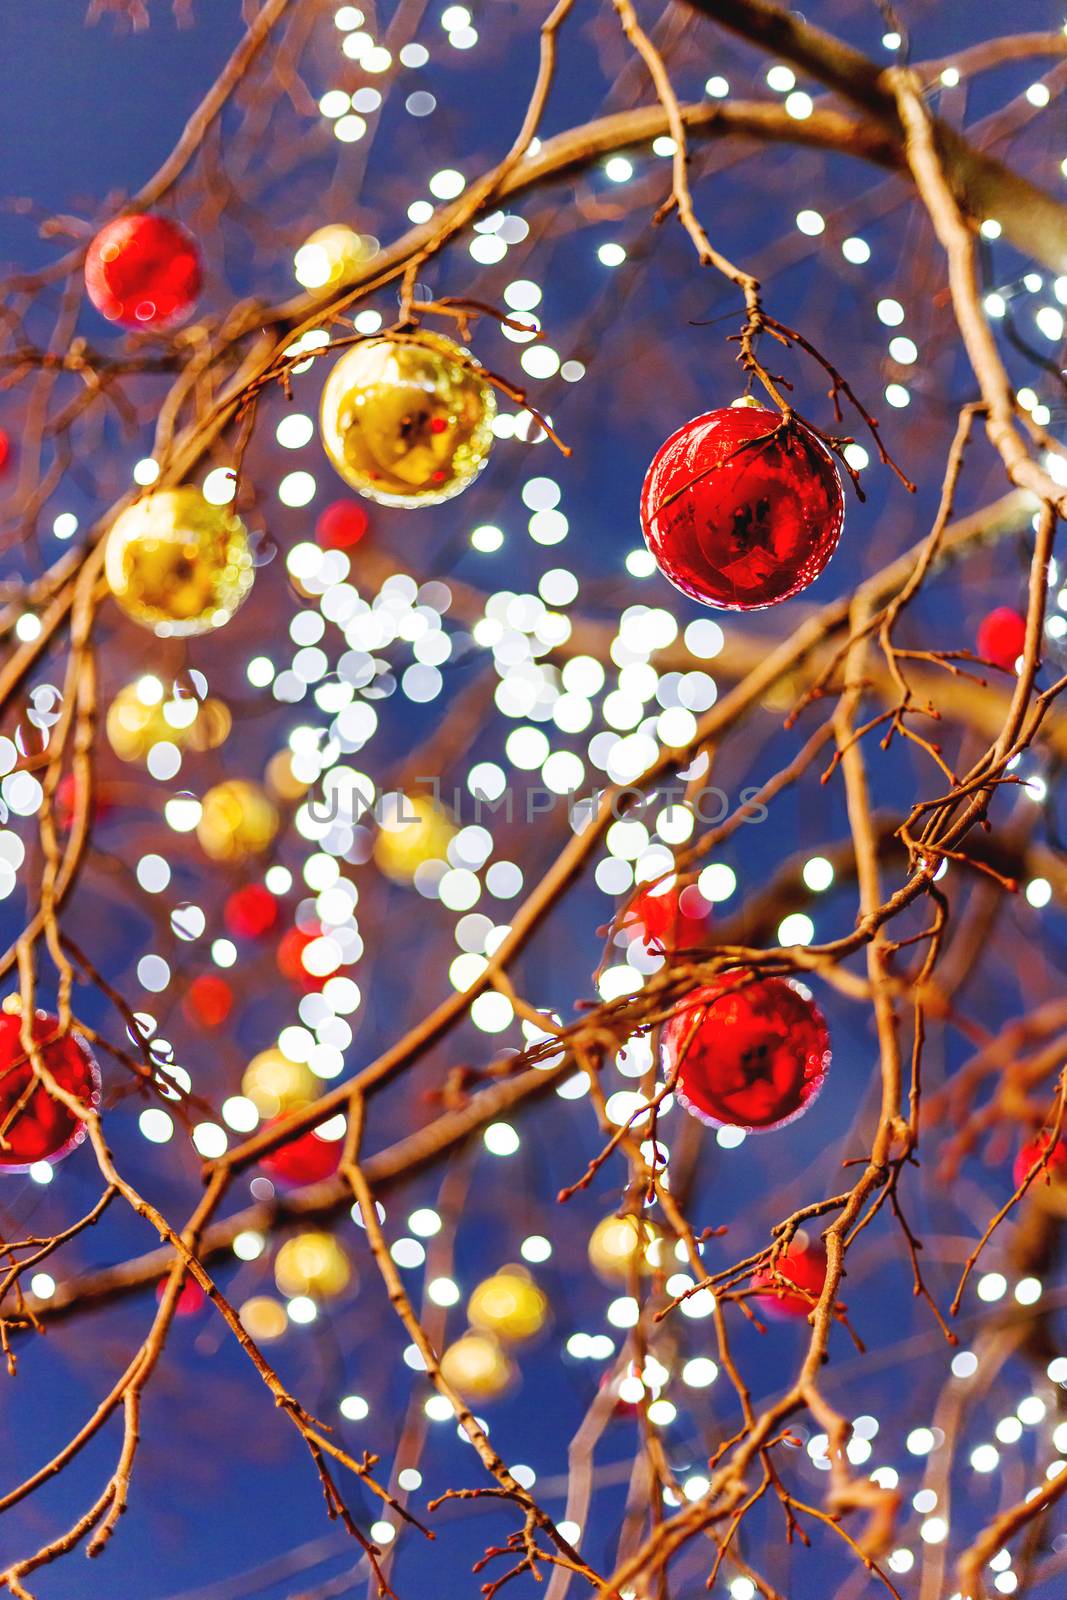 Streets of Moscow decorated for New Year and Christmas celebration. Tree with bright red and yellow balls. Russia.